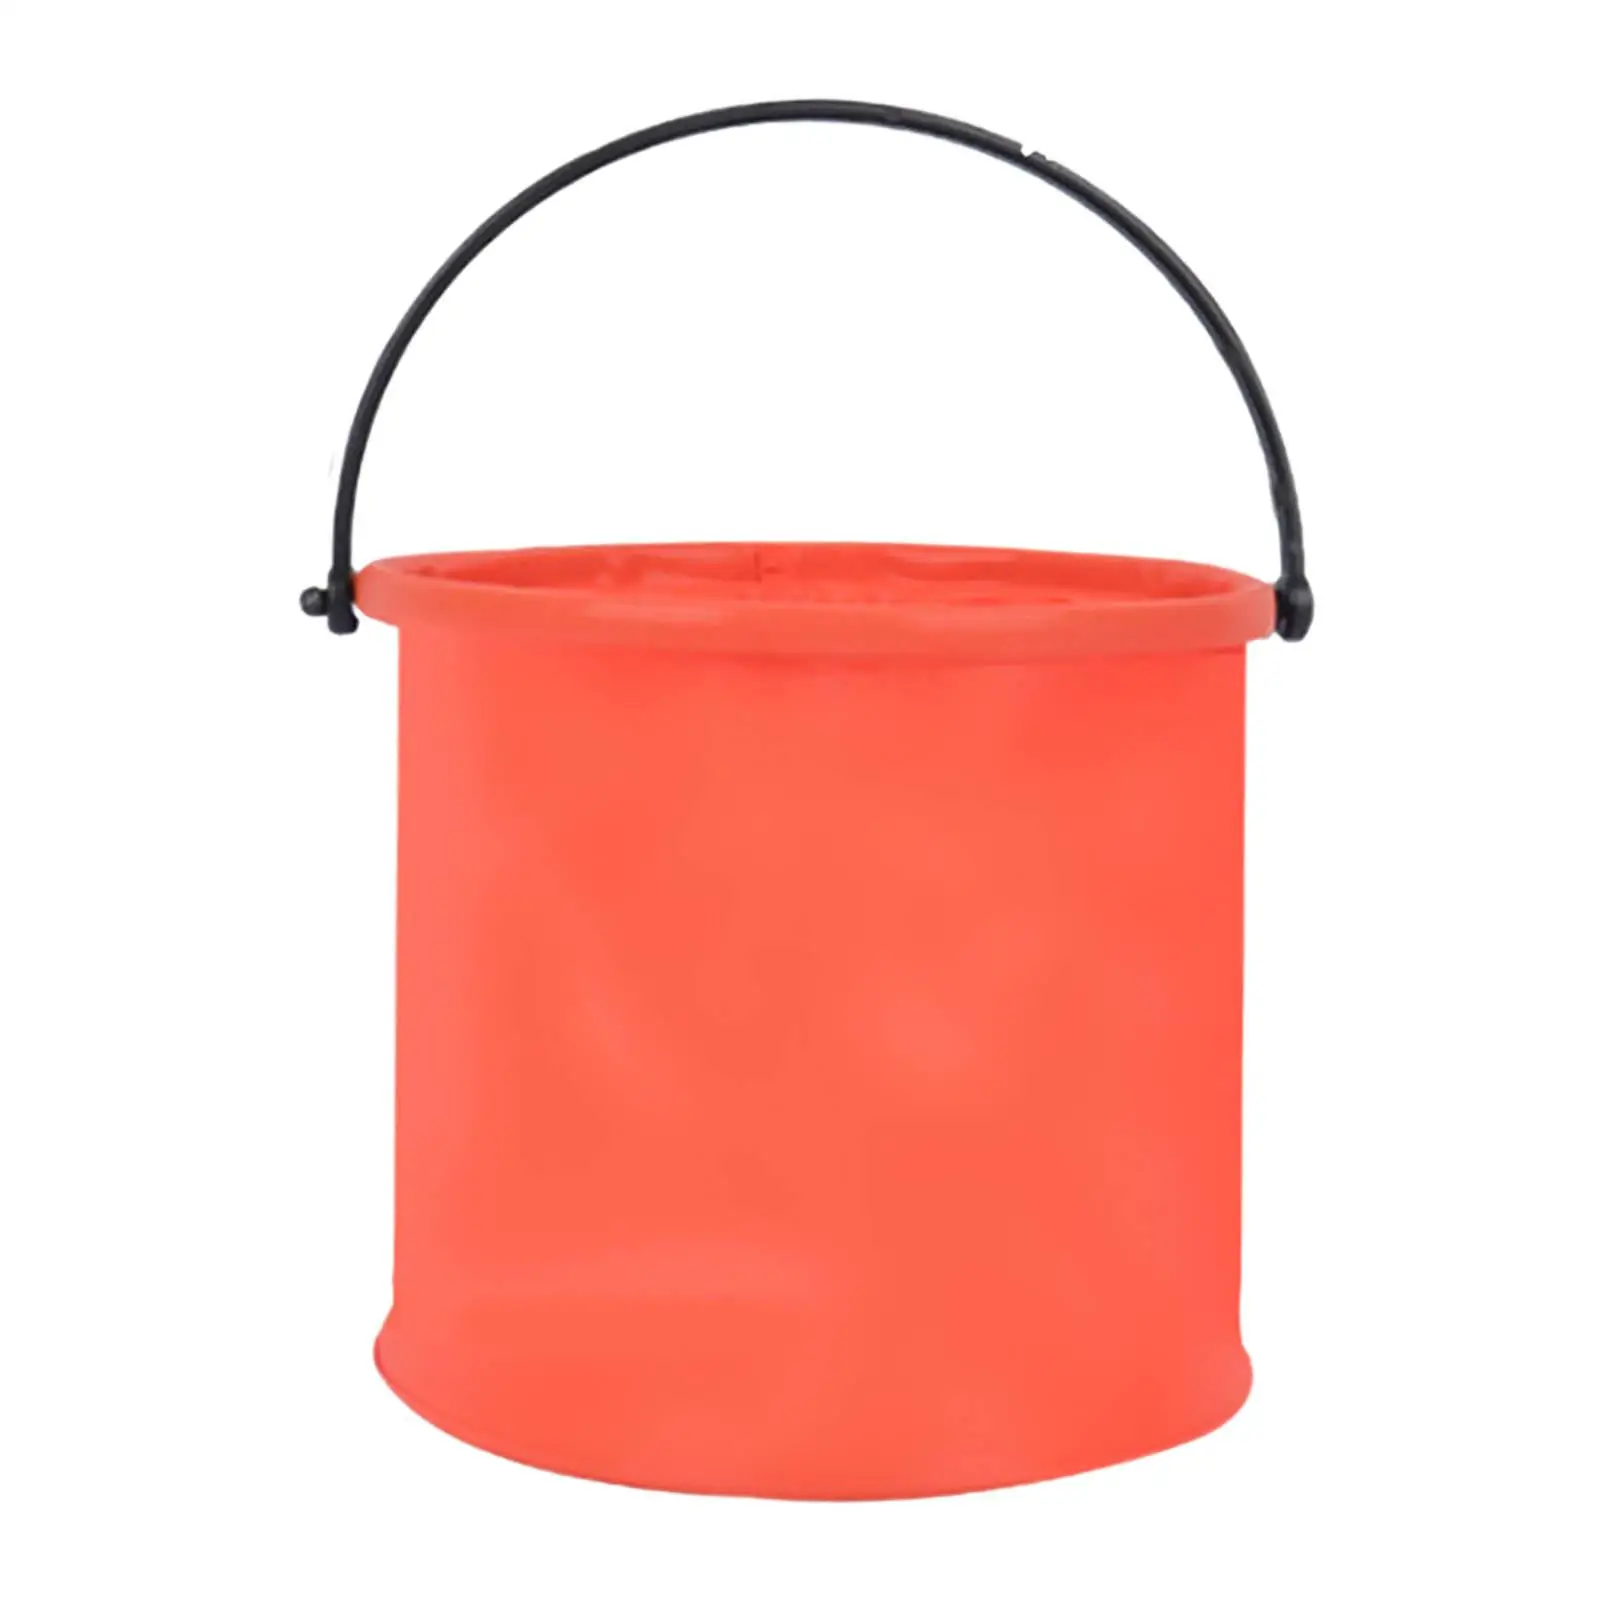 Collapsible Bucket Foldable Water Container for Outdoor Car Washing